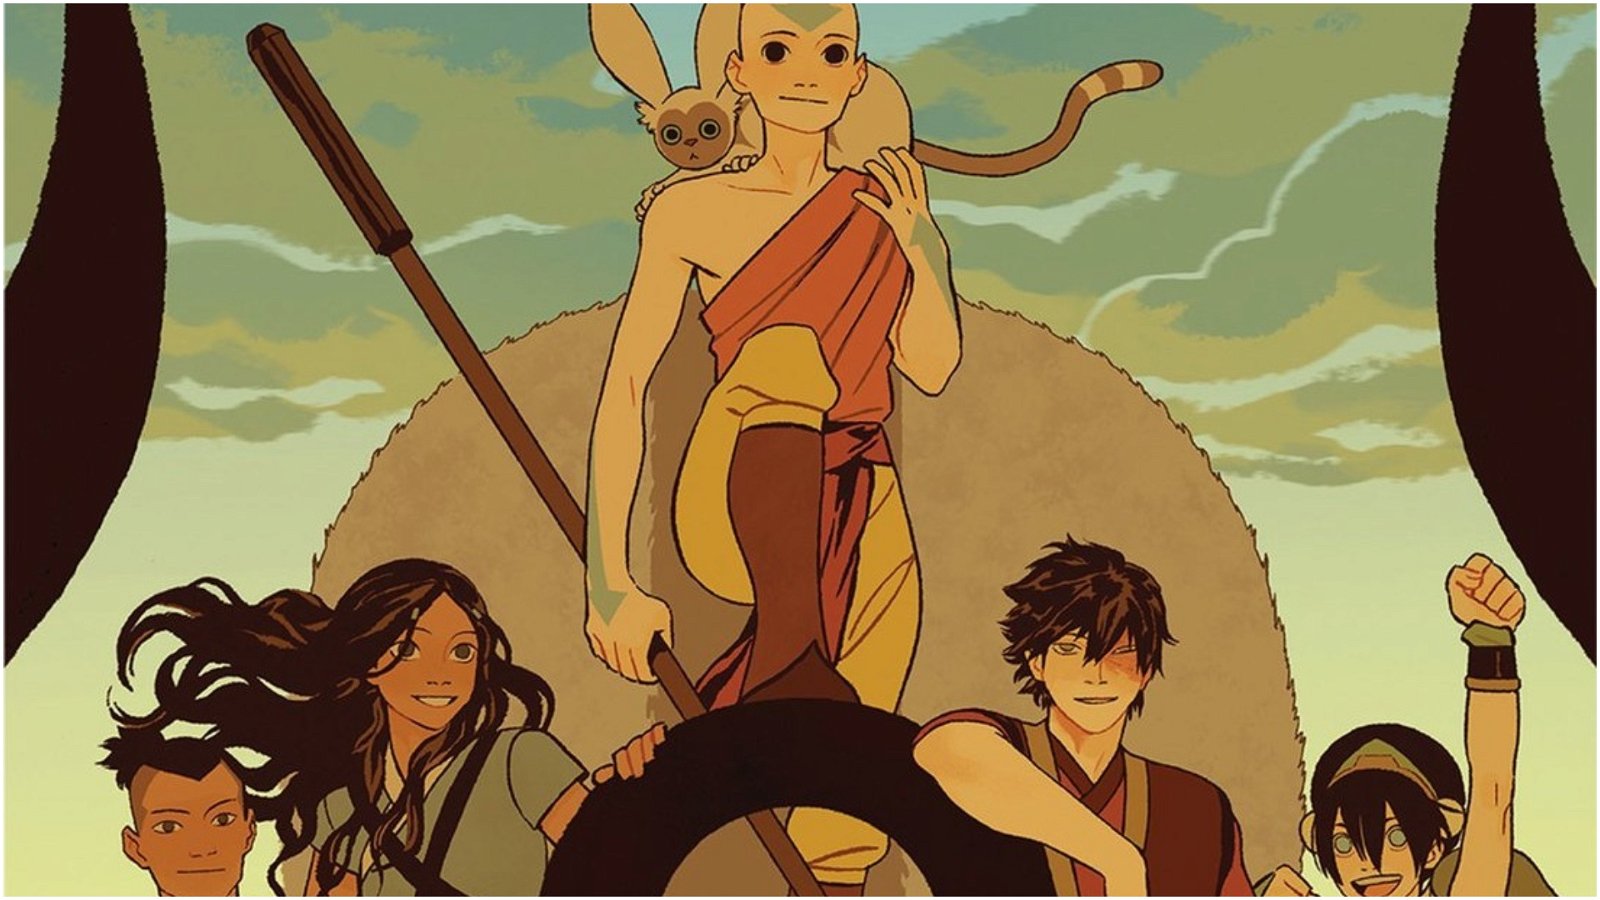 New Avatar The Last Airbender Graphic Novels Announced